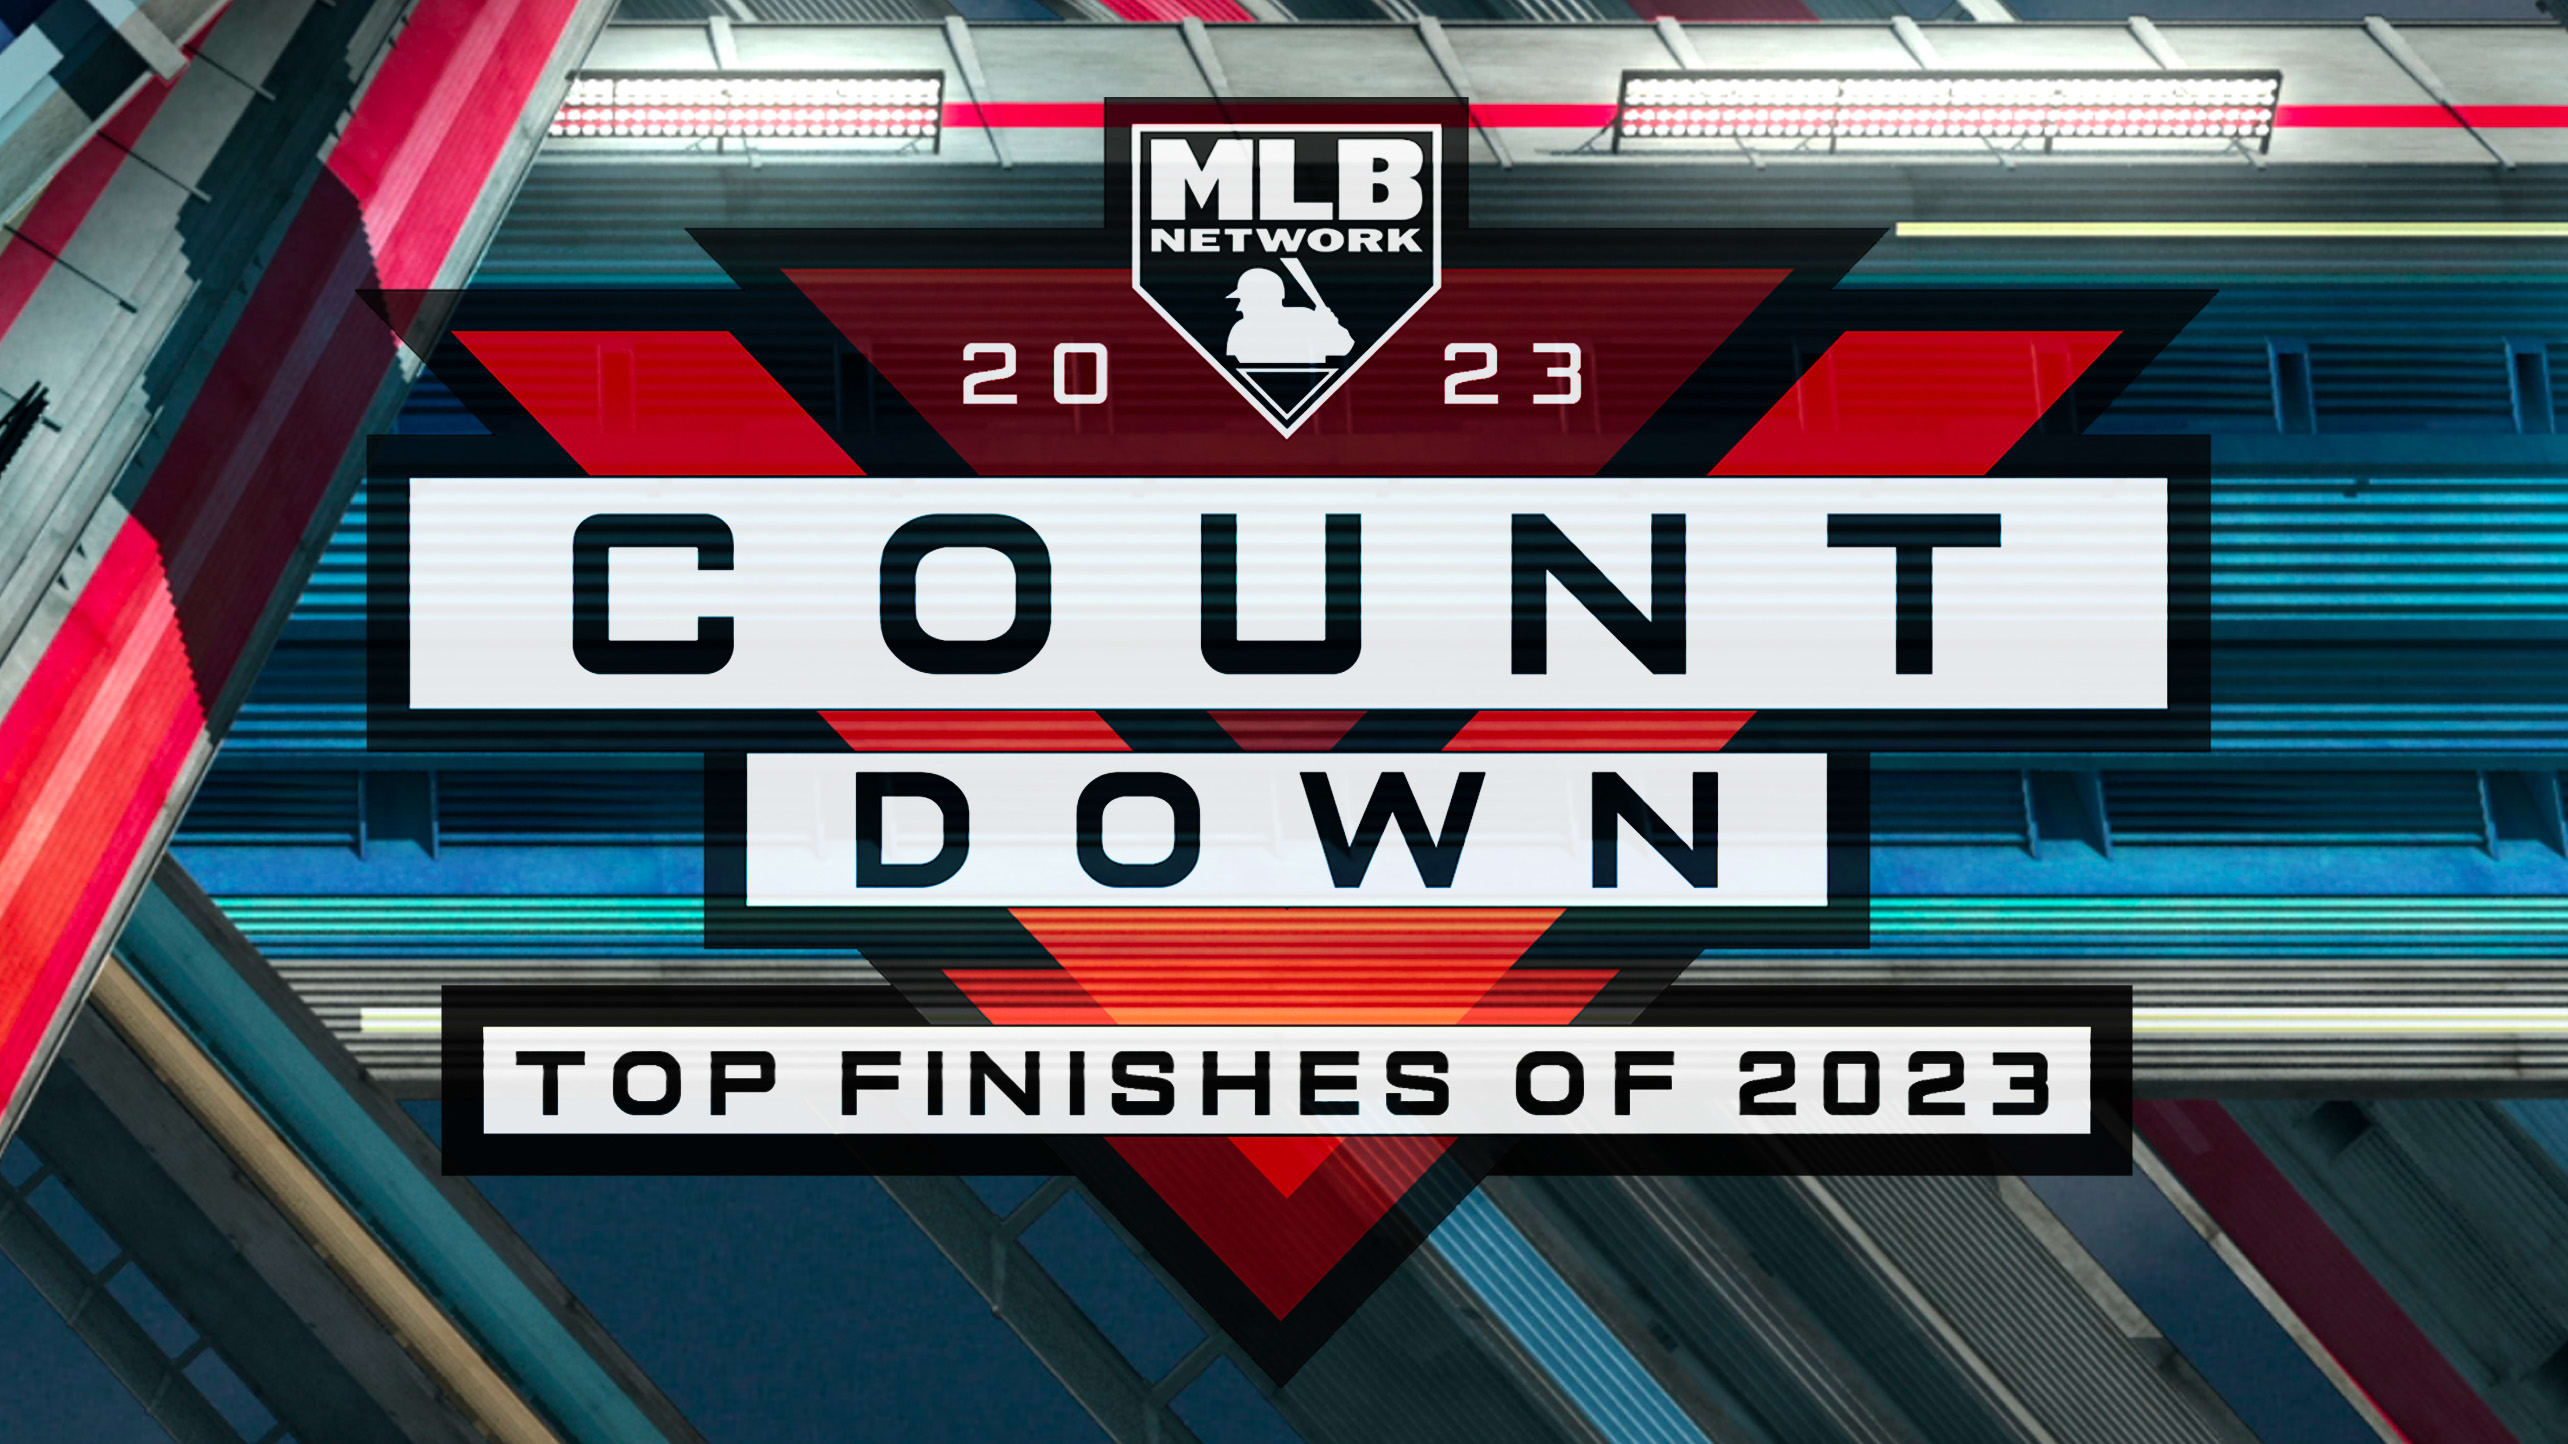 MLB Network Top Finishes of the Year